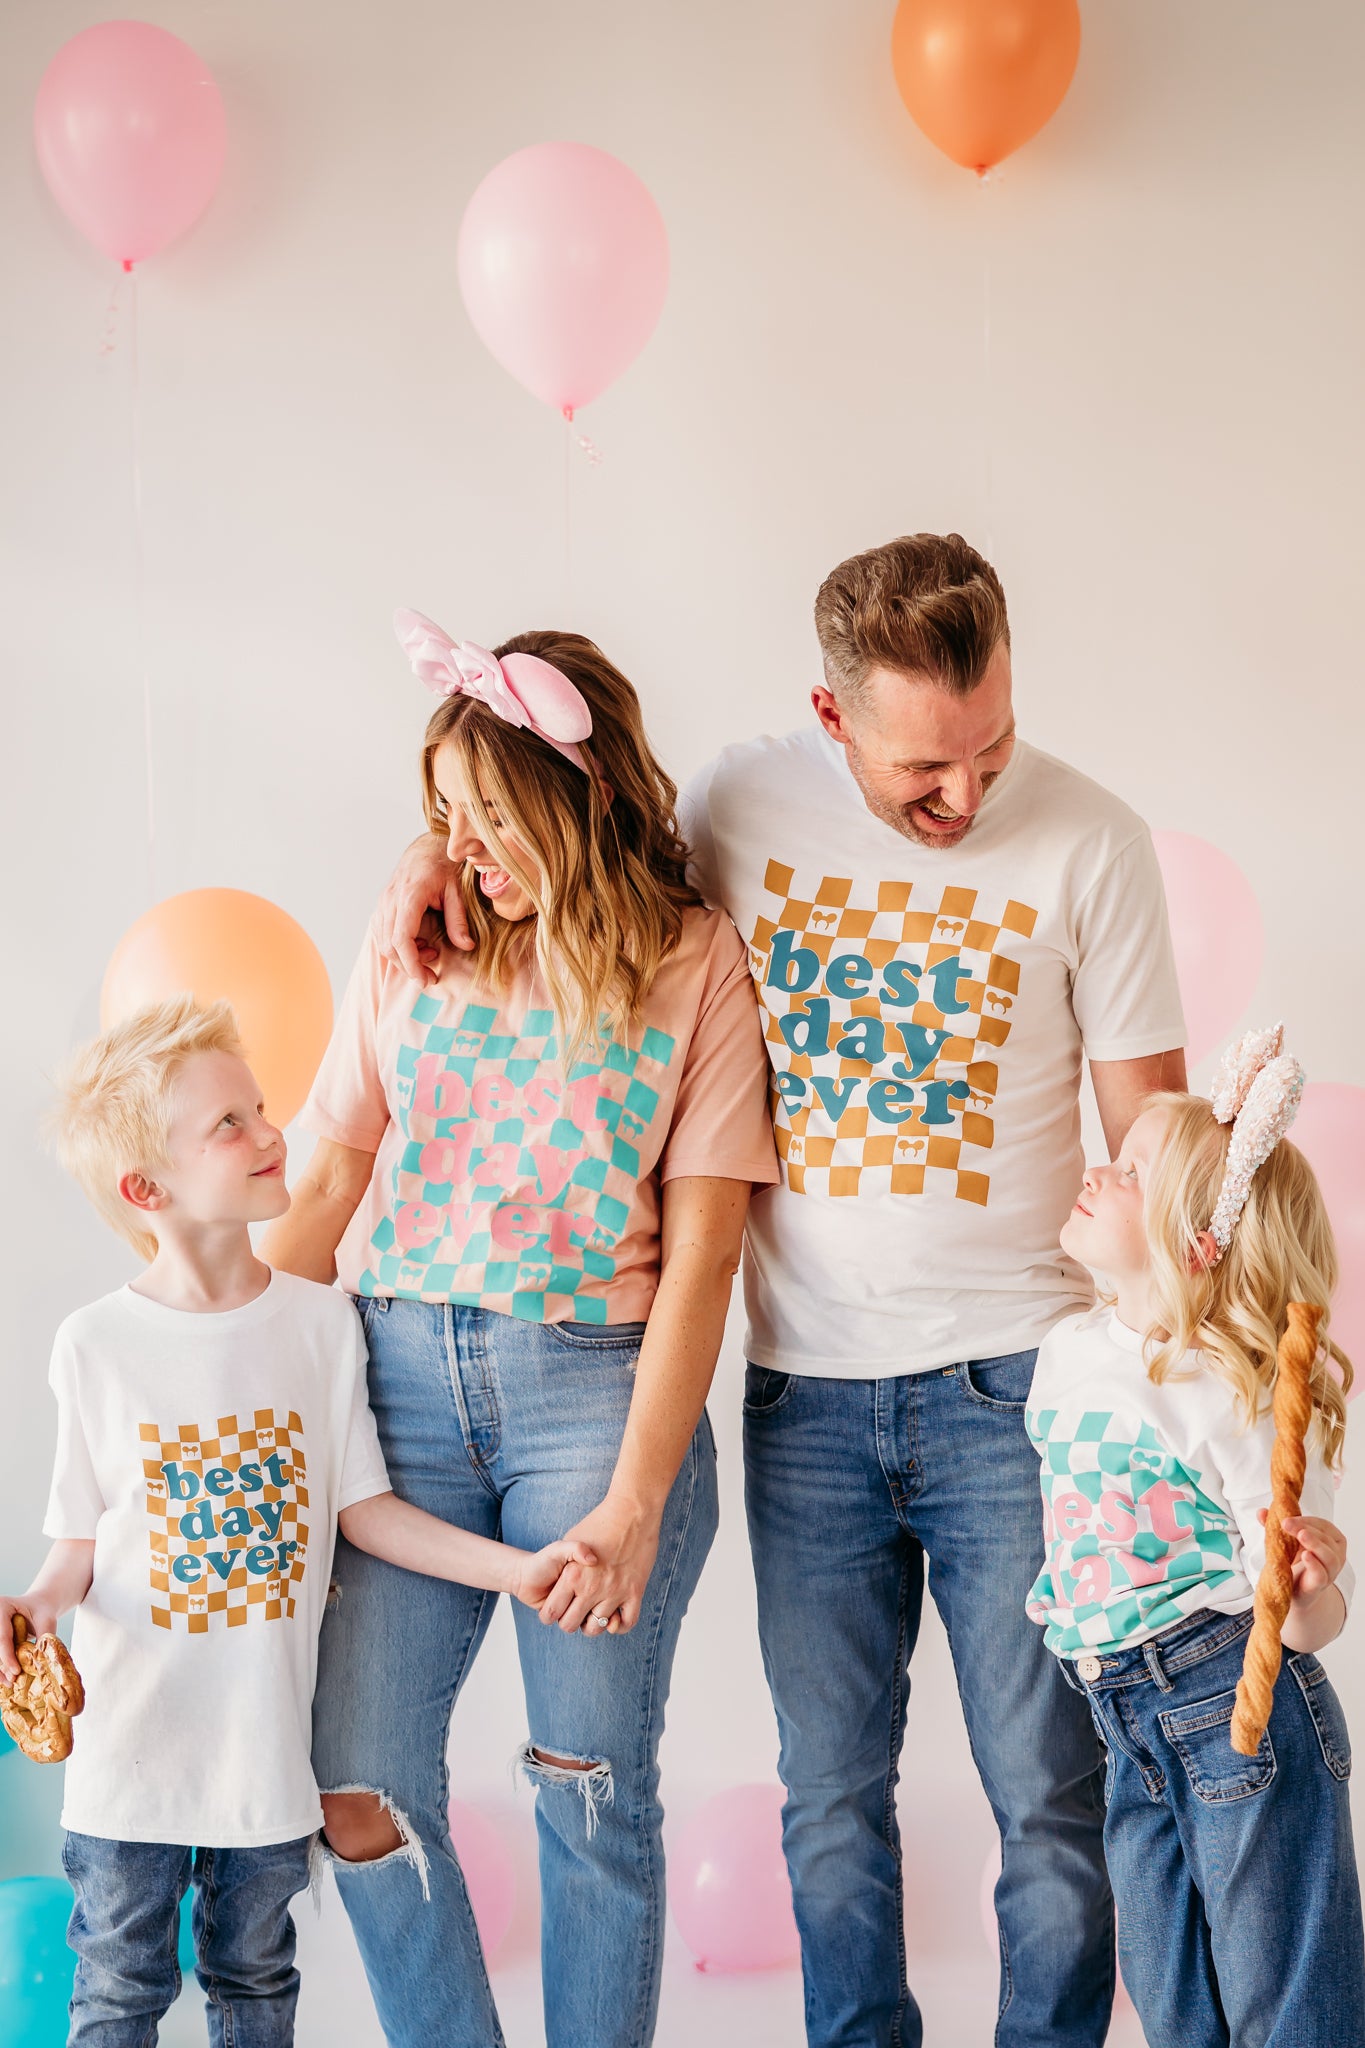 THE BEST DAY EVER KIDS WHITE TEE BY HAPPY THREADS X PINK DESERT IN BLUE AND ORANGE